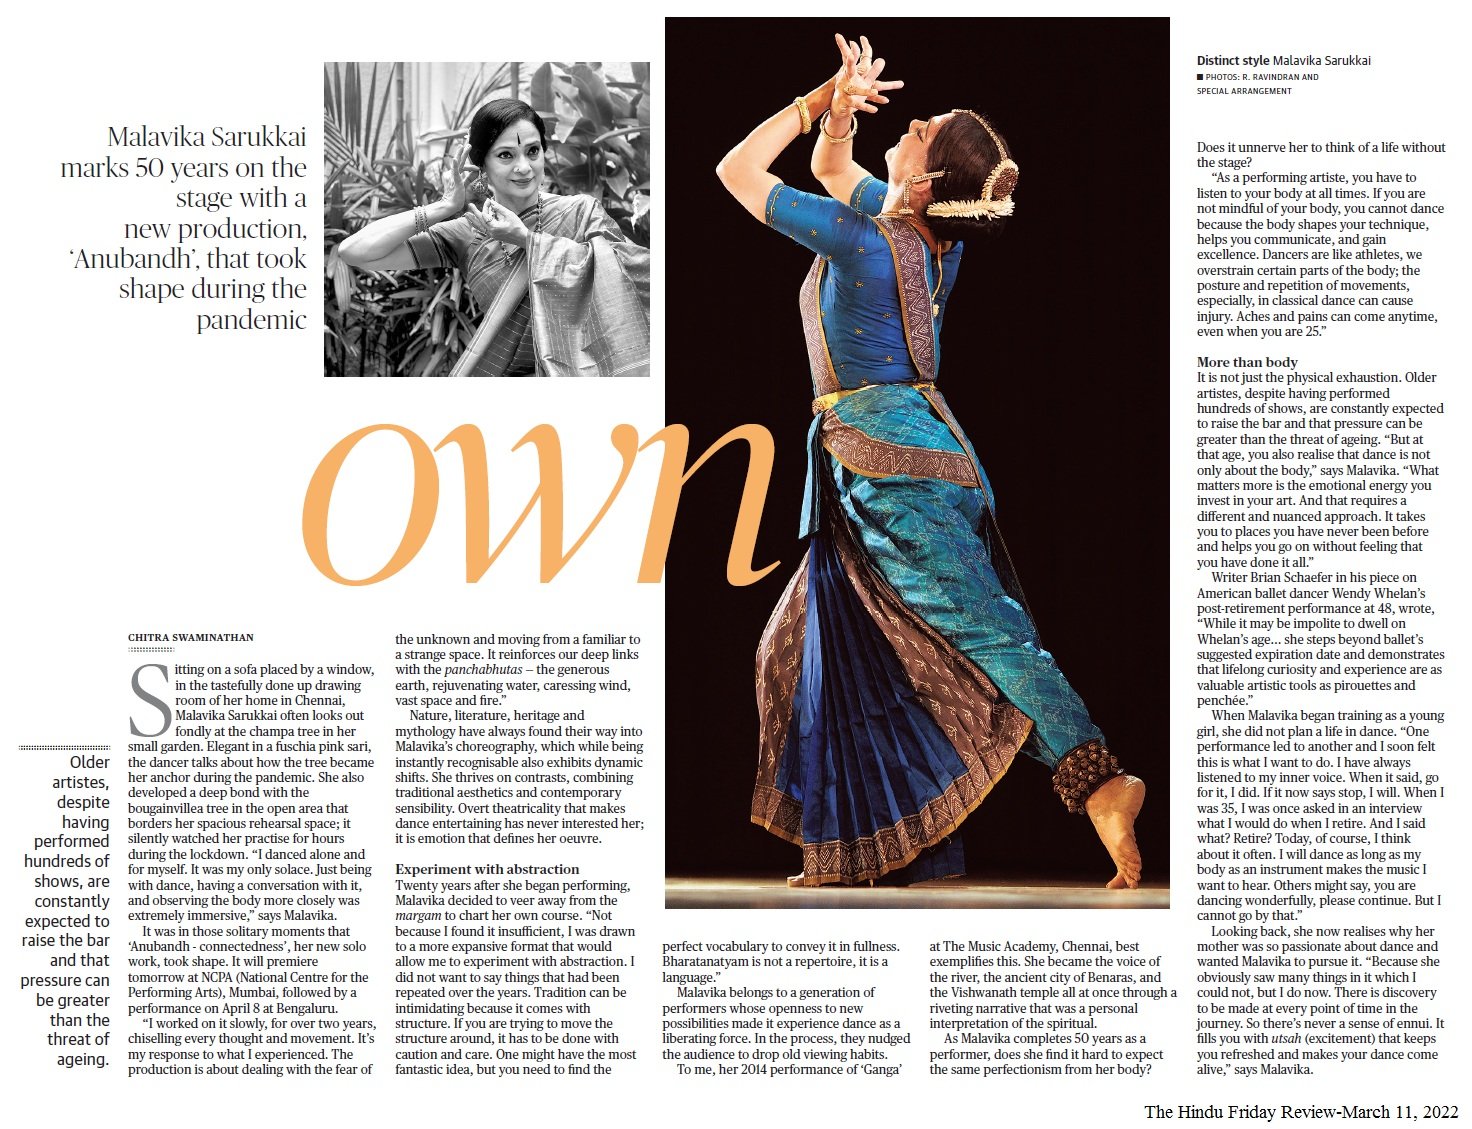 On a path of her own - Chitra Swaminathan